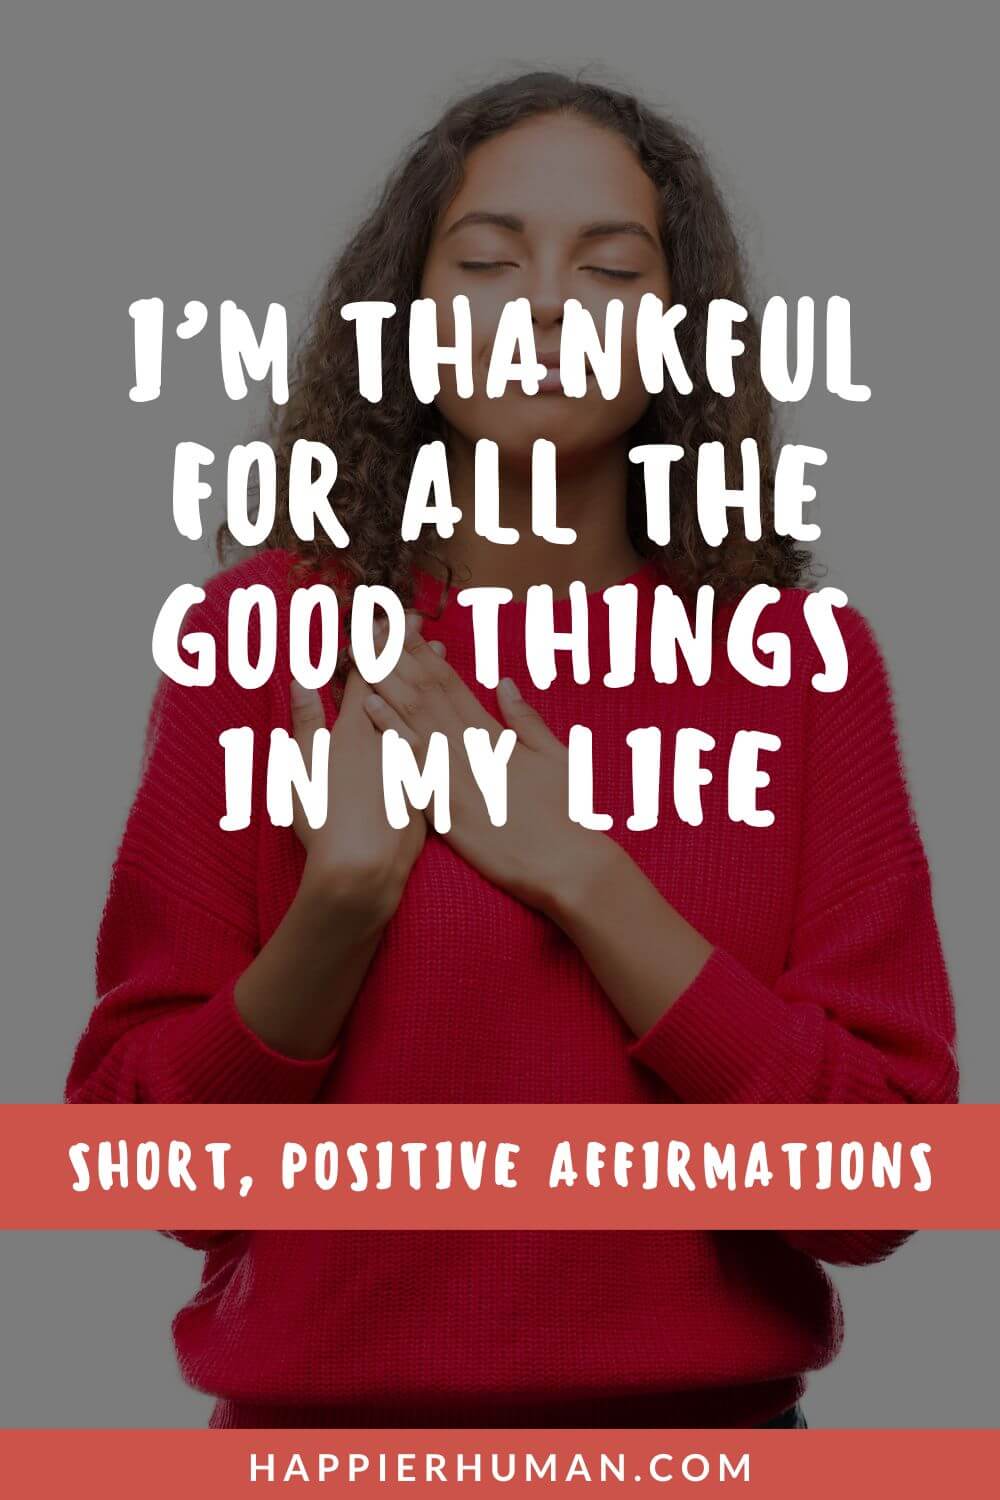 Short Positive Affirmations - I’m thankful for all the good things in my life | short positive affirmations for students | short positive affirmations for work | powerful daily affirmations